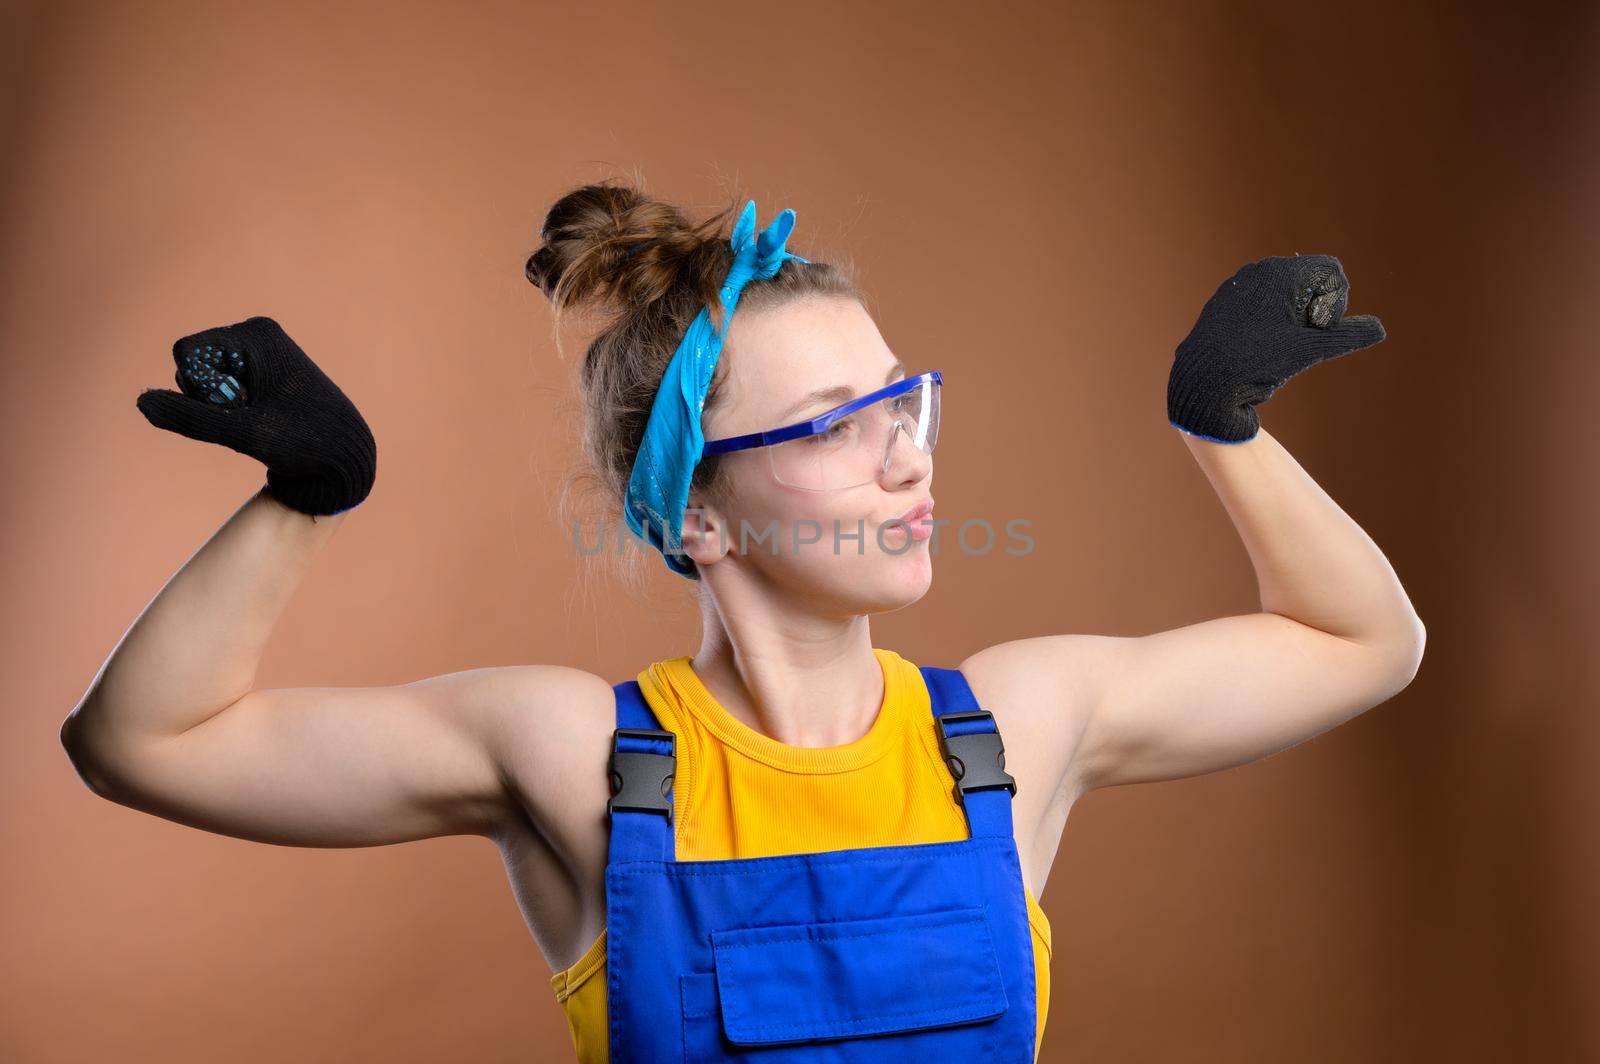 Strong stylish caucasian woman repairman foreman in overalls showing a gesture of strength showing biceps. Studio portrait of a young and strong feminine woman by yanik88